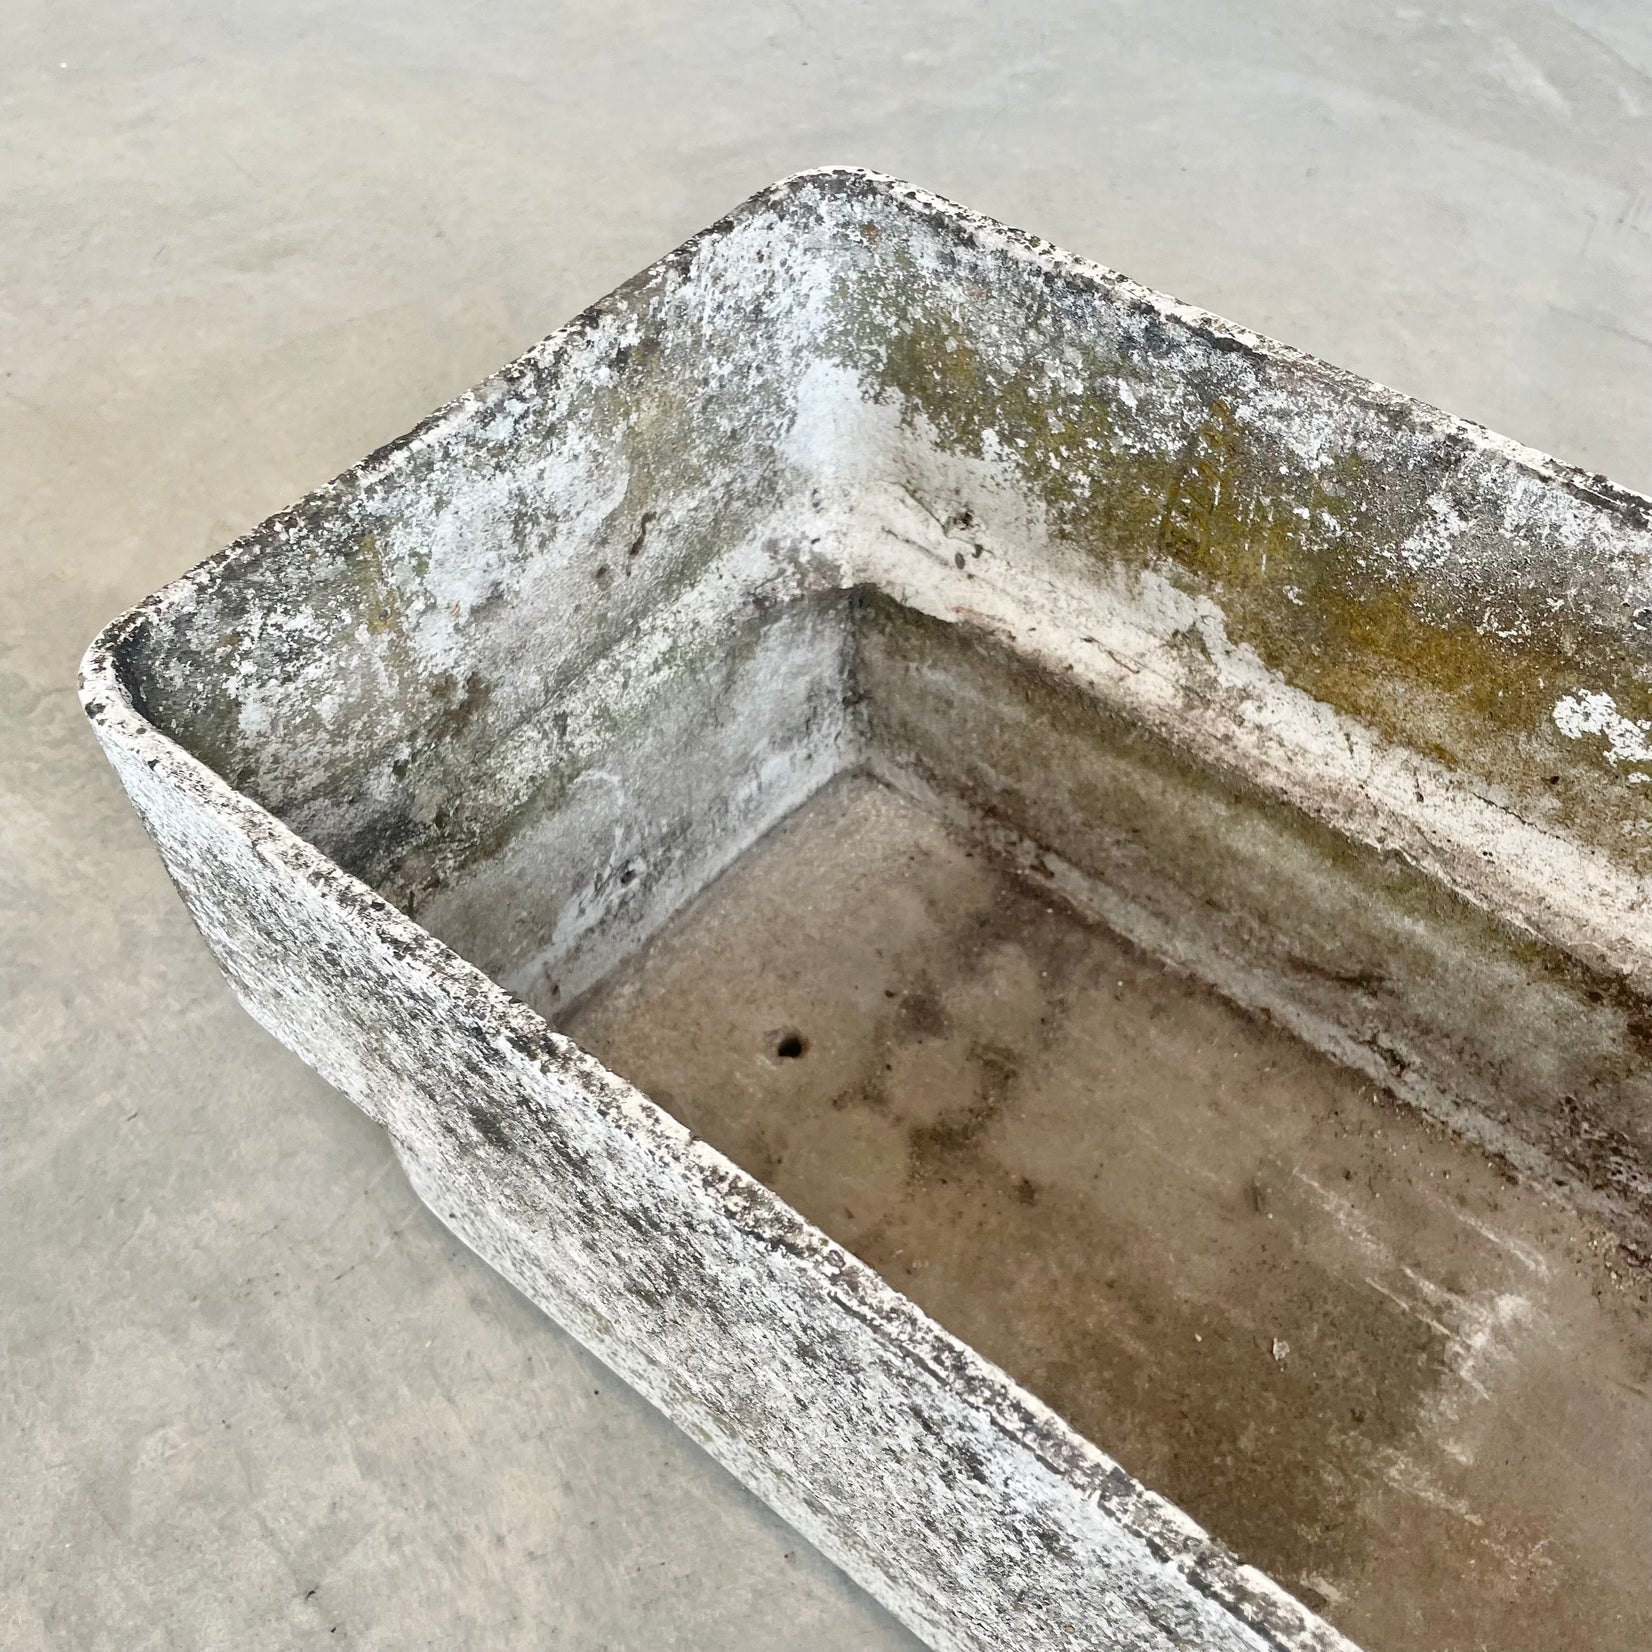 Two Tiered 47" Concrete Trough Planters